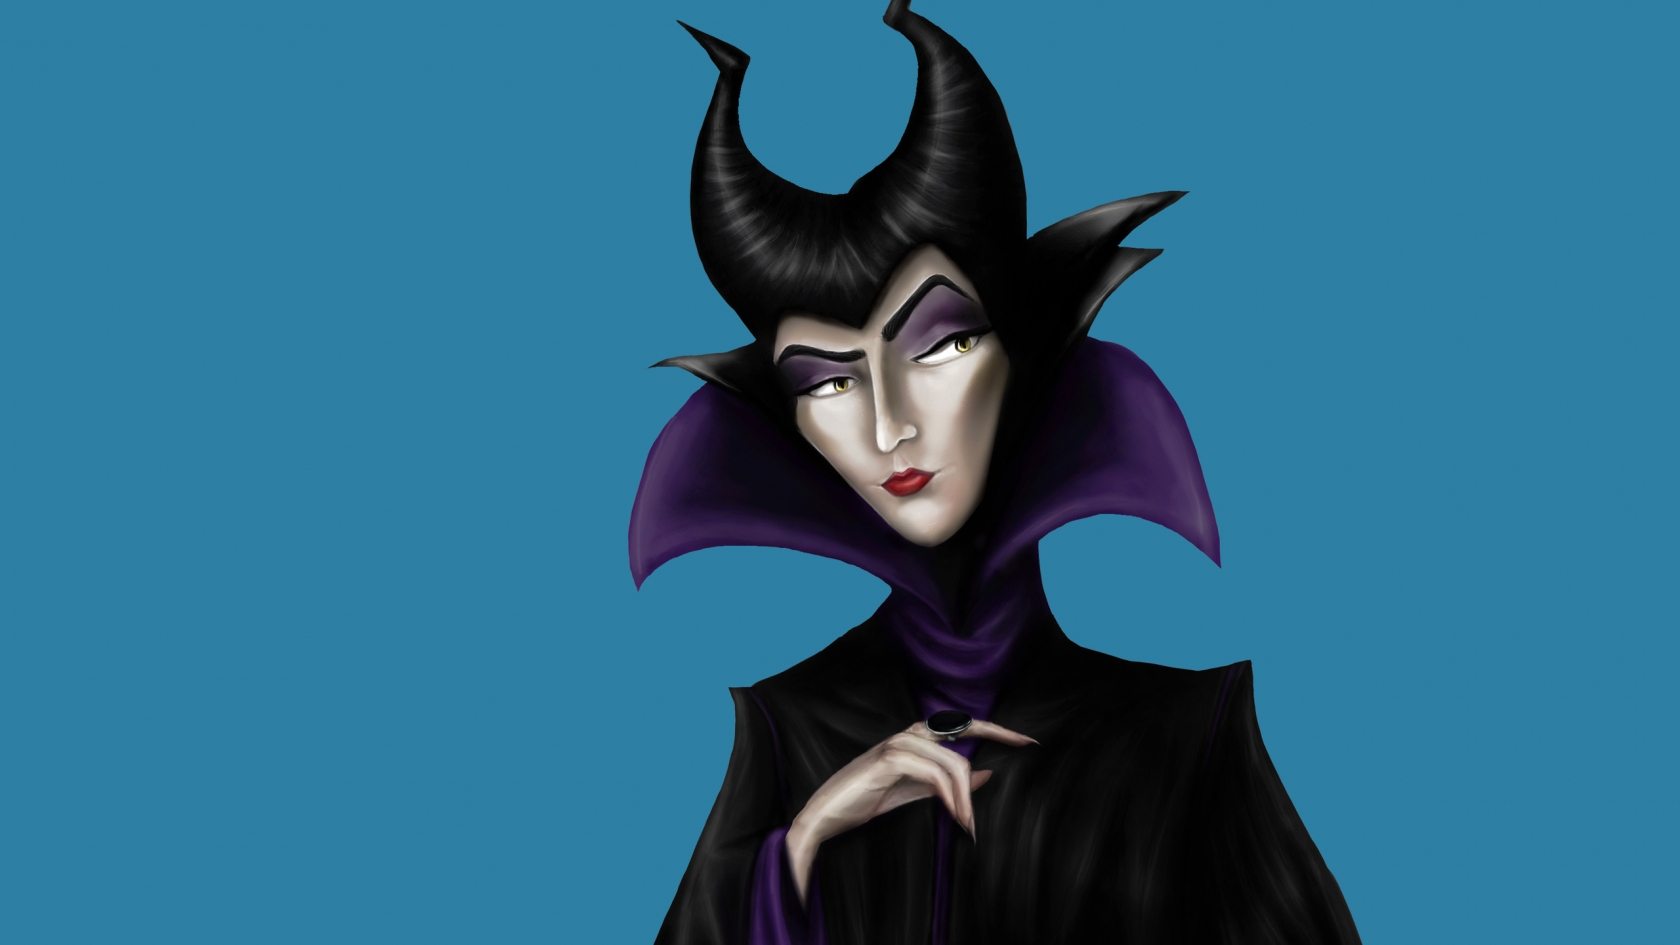 Maleficent Drawing for 1680 x 945 HDTV resolution